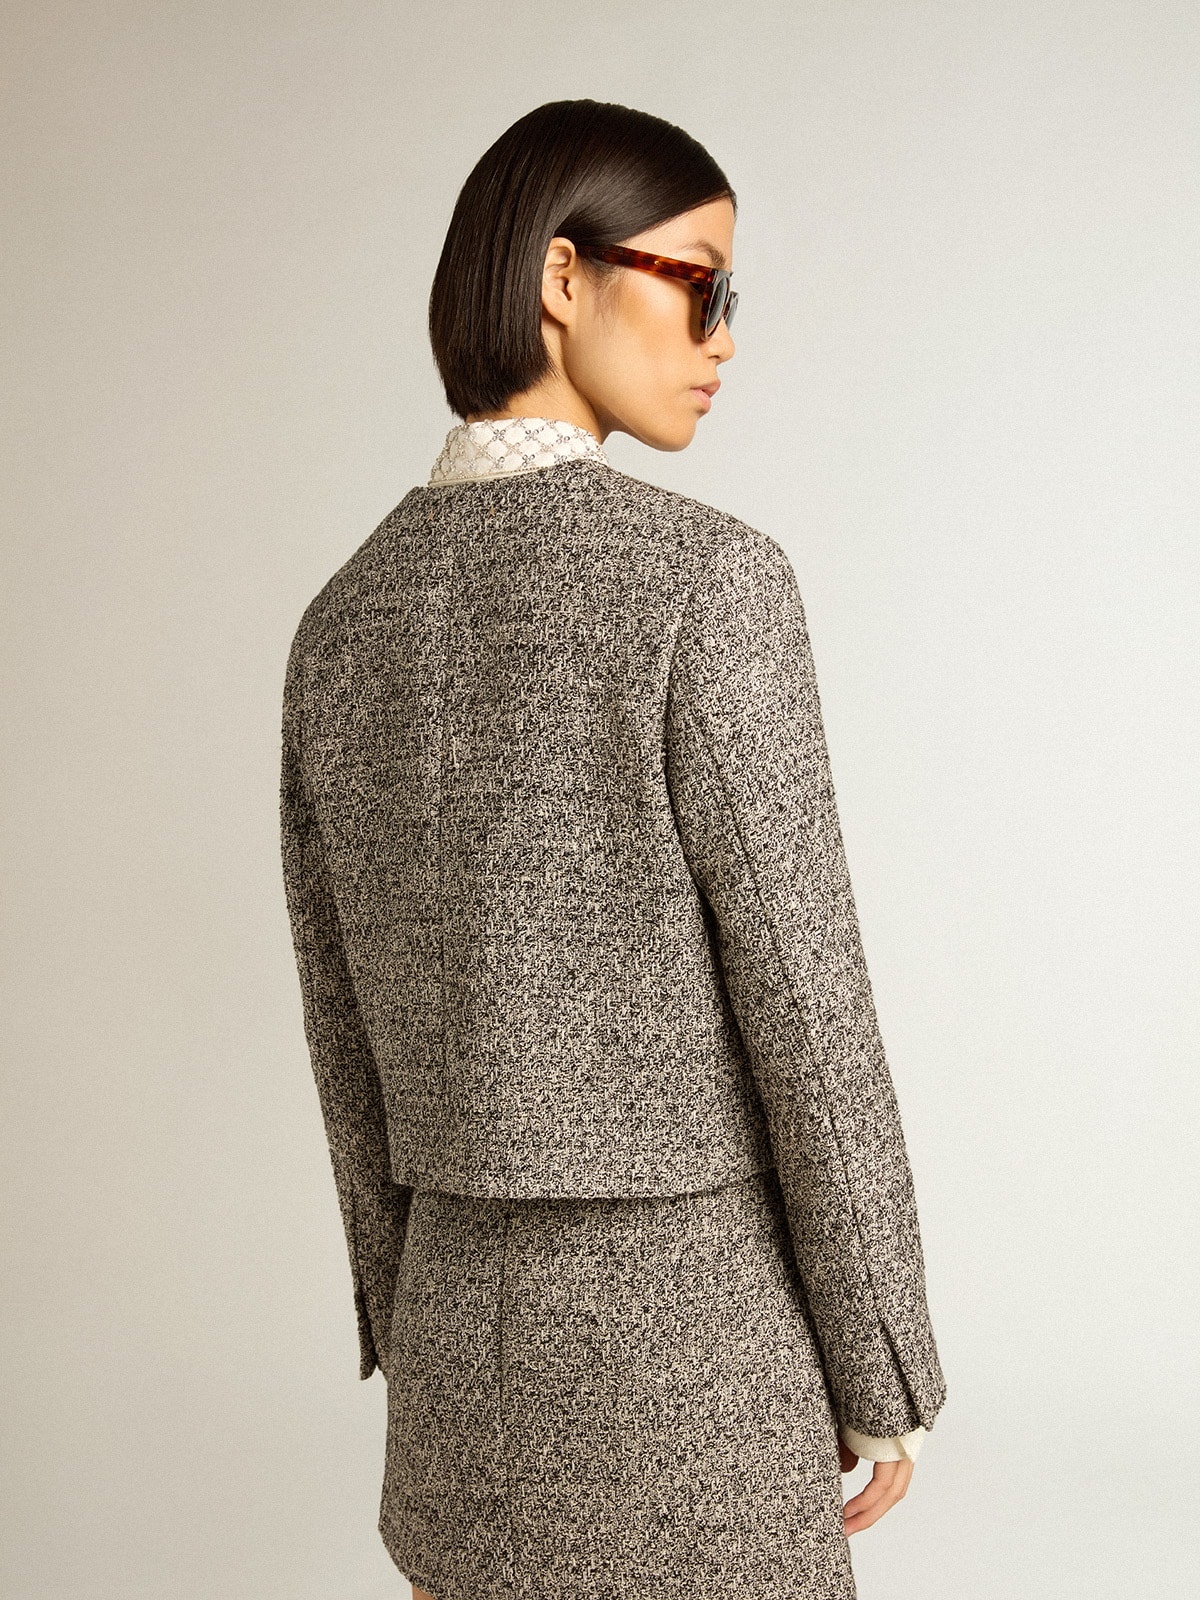 Boxy cropped jacket in gray bouclé fabric - 4